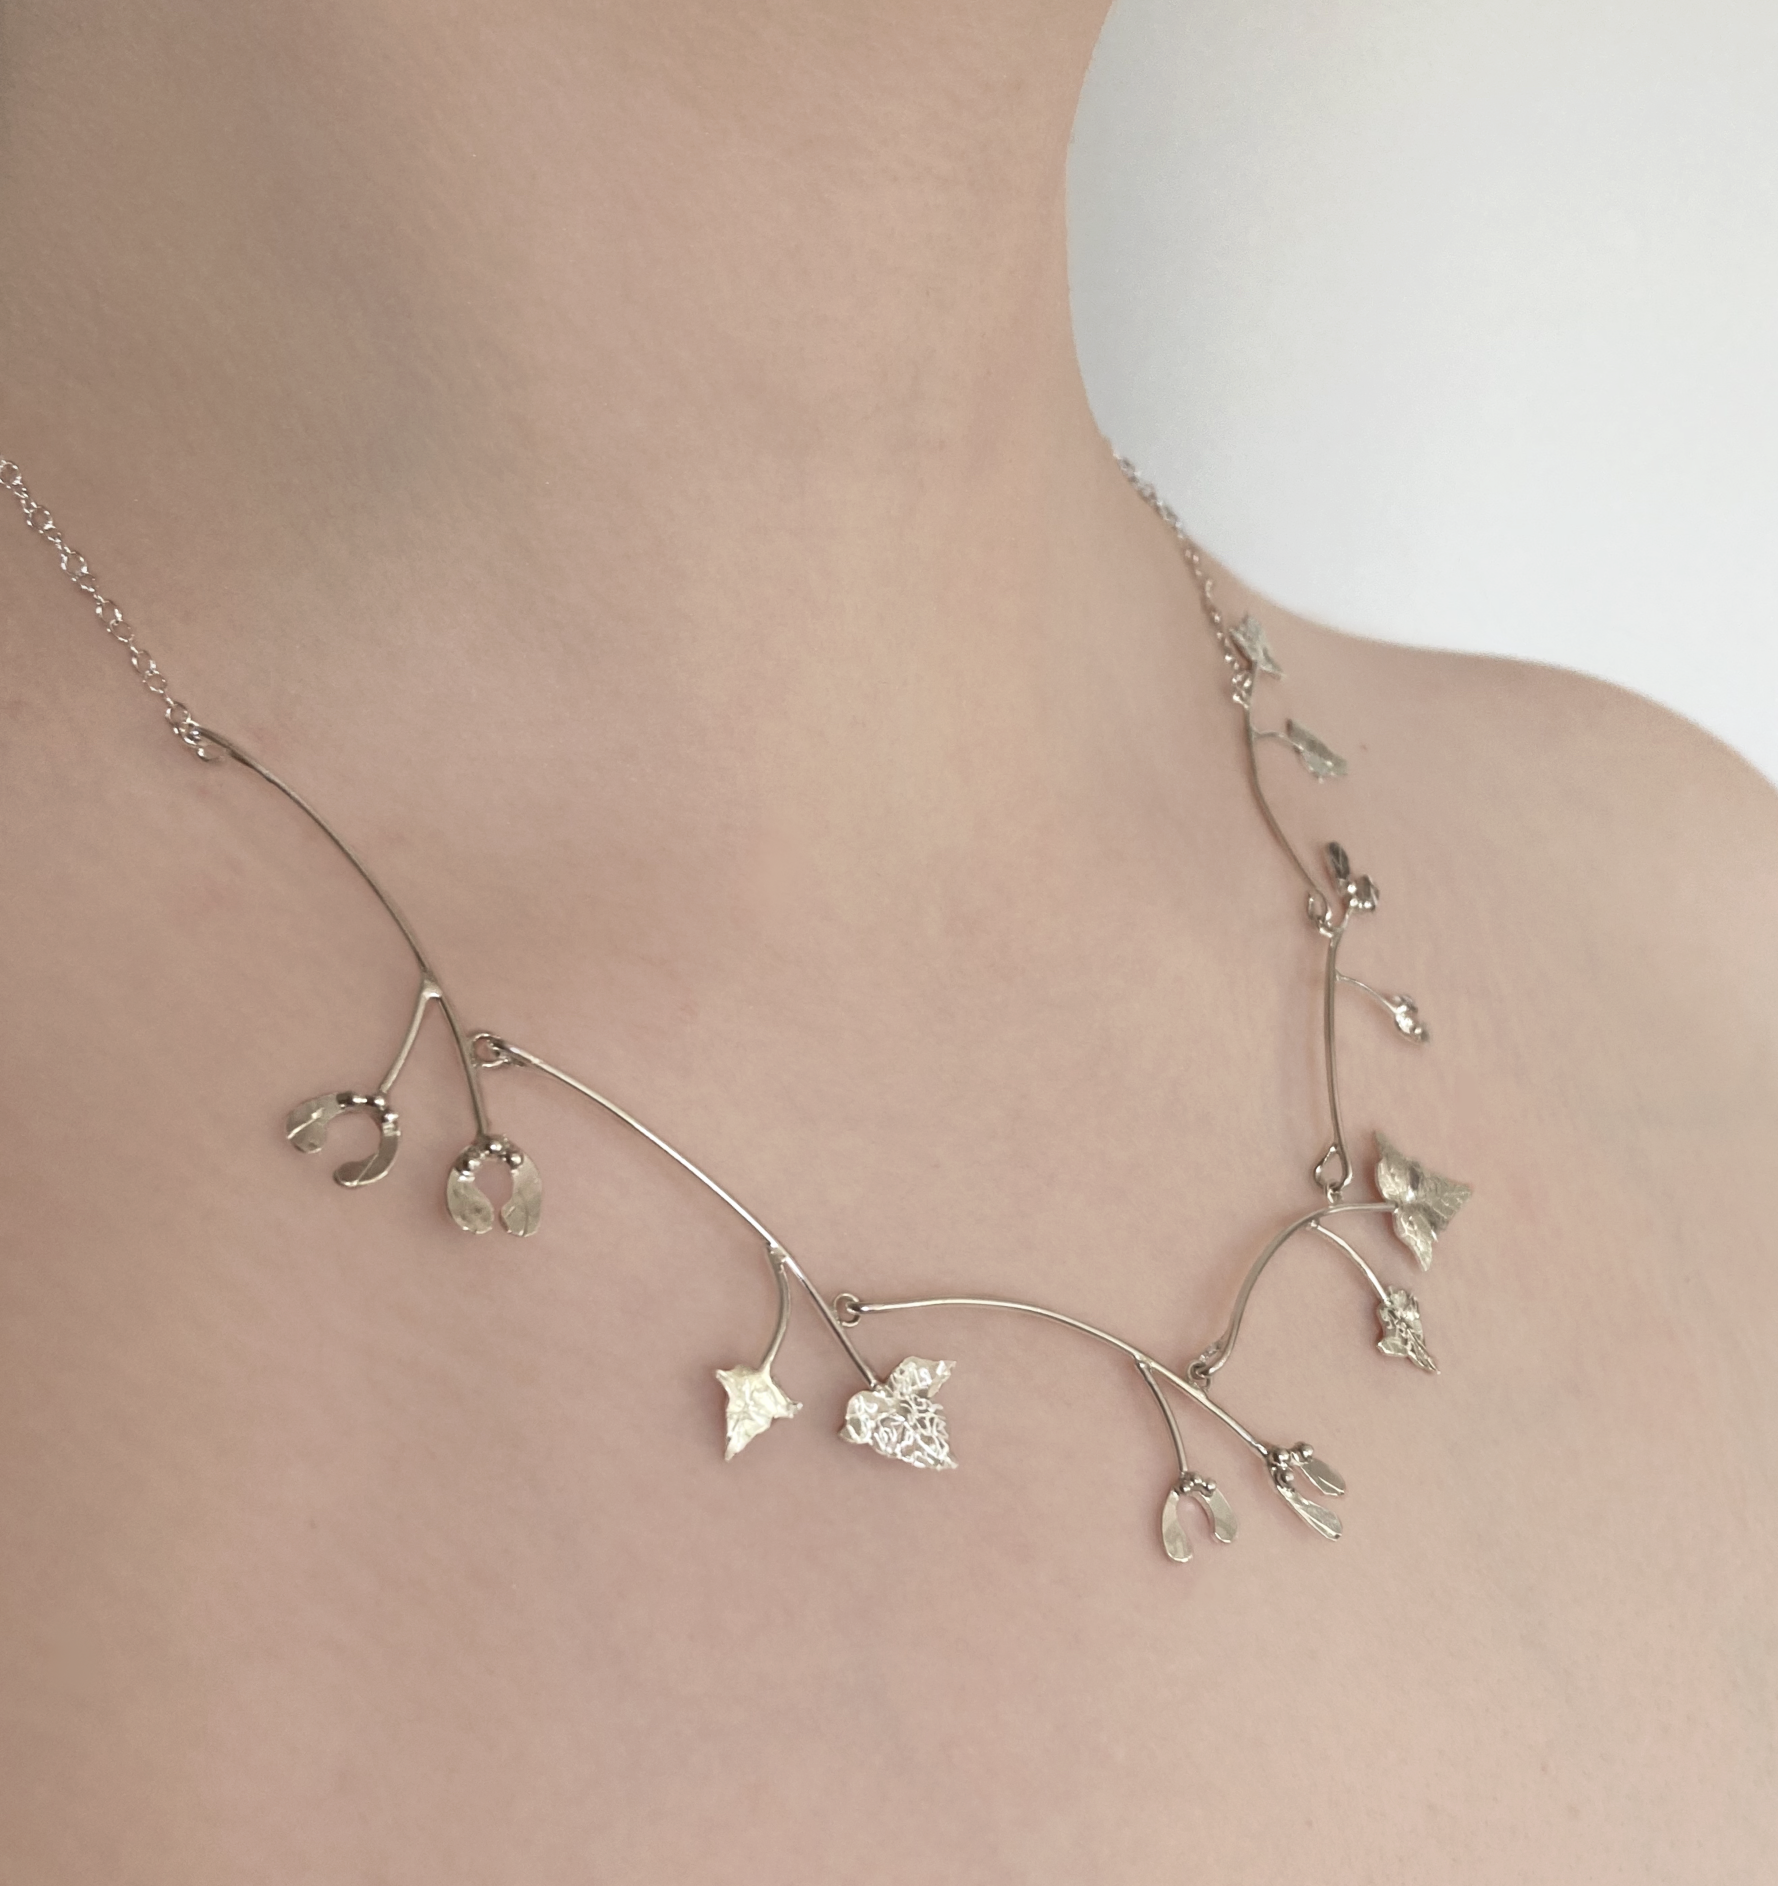 silver handmade floral necklace of mistletoe and vine leaves, worn on neck